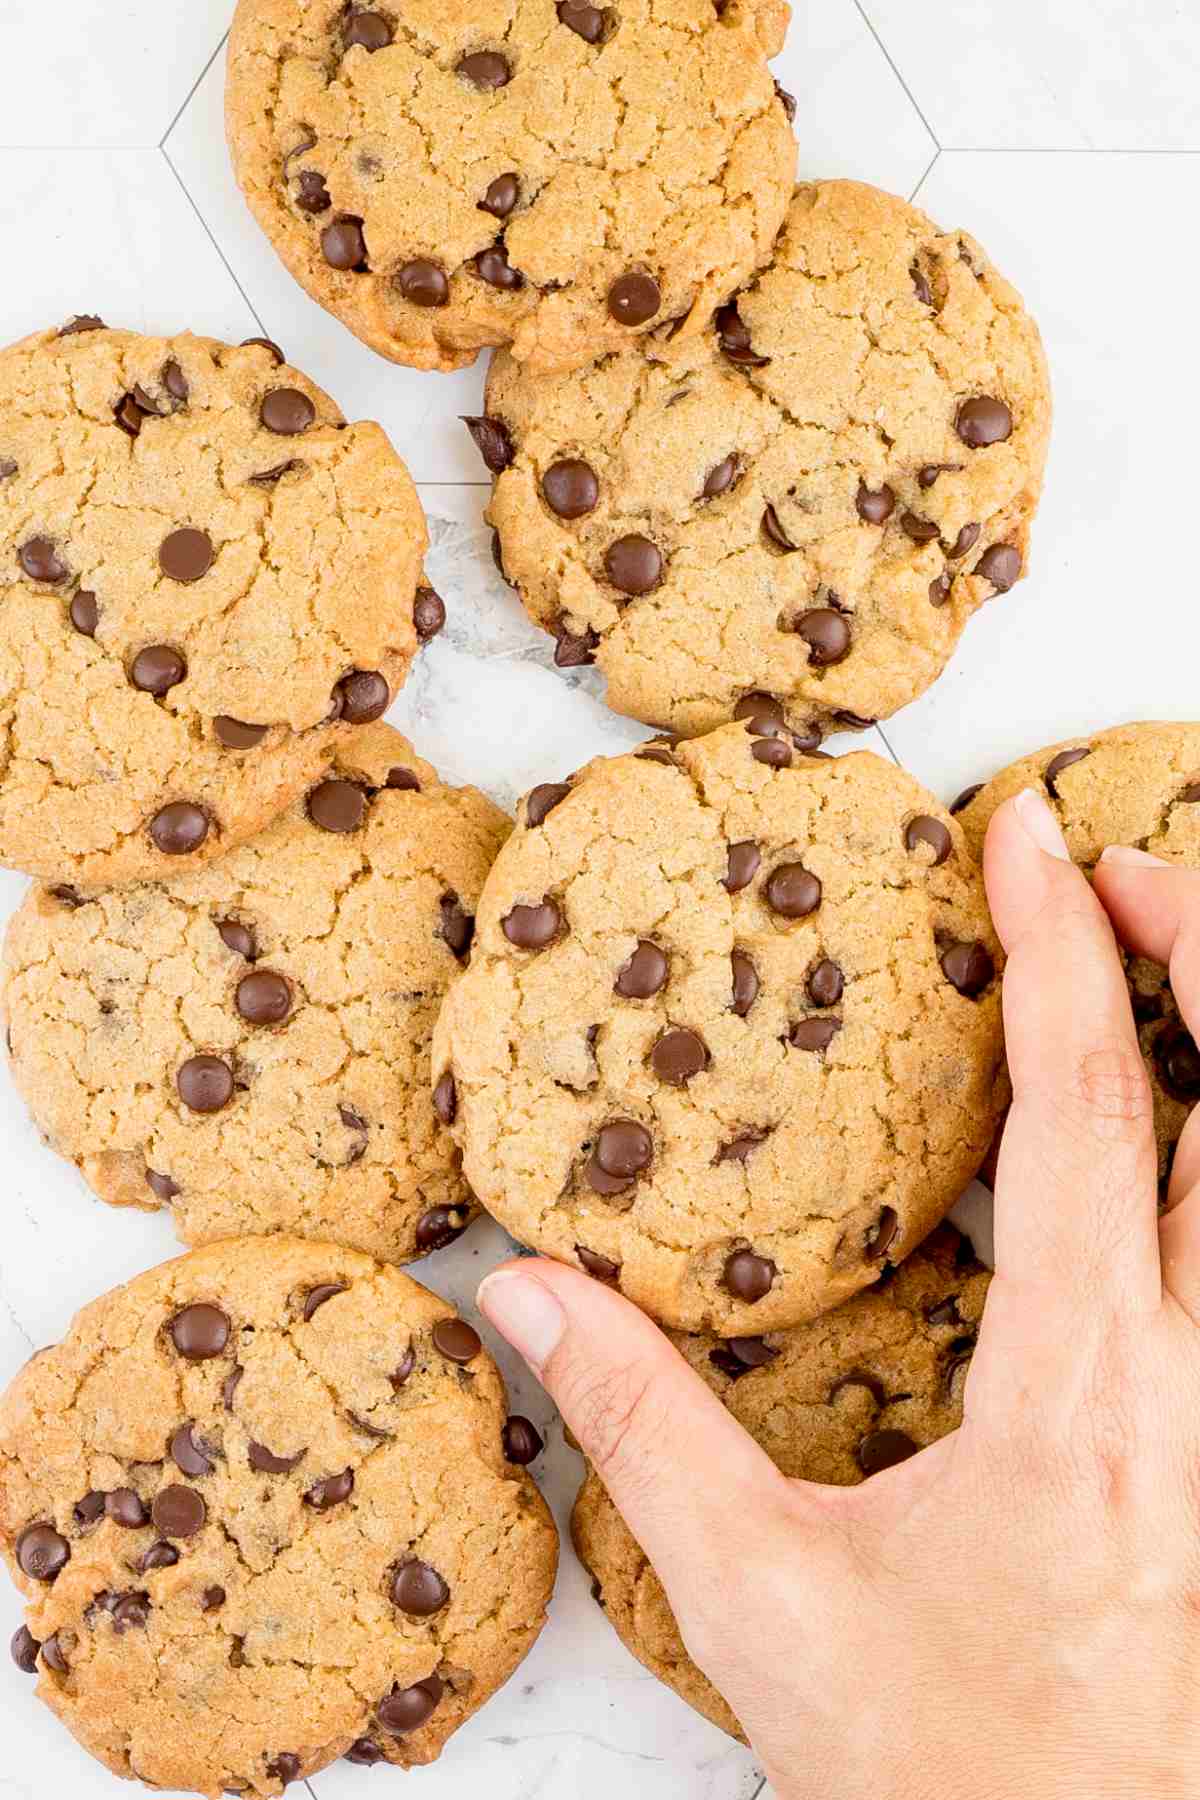 Lots of chocolate chip cookies on a white wooden surface. A hand is about to take one cookie.